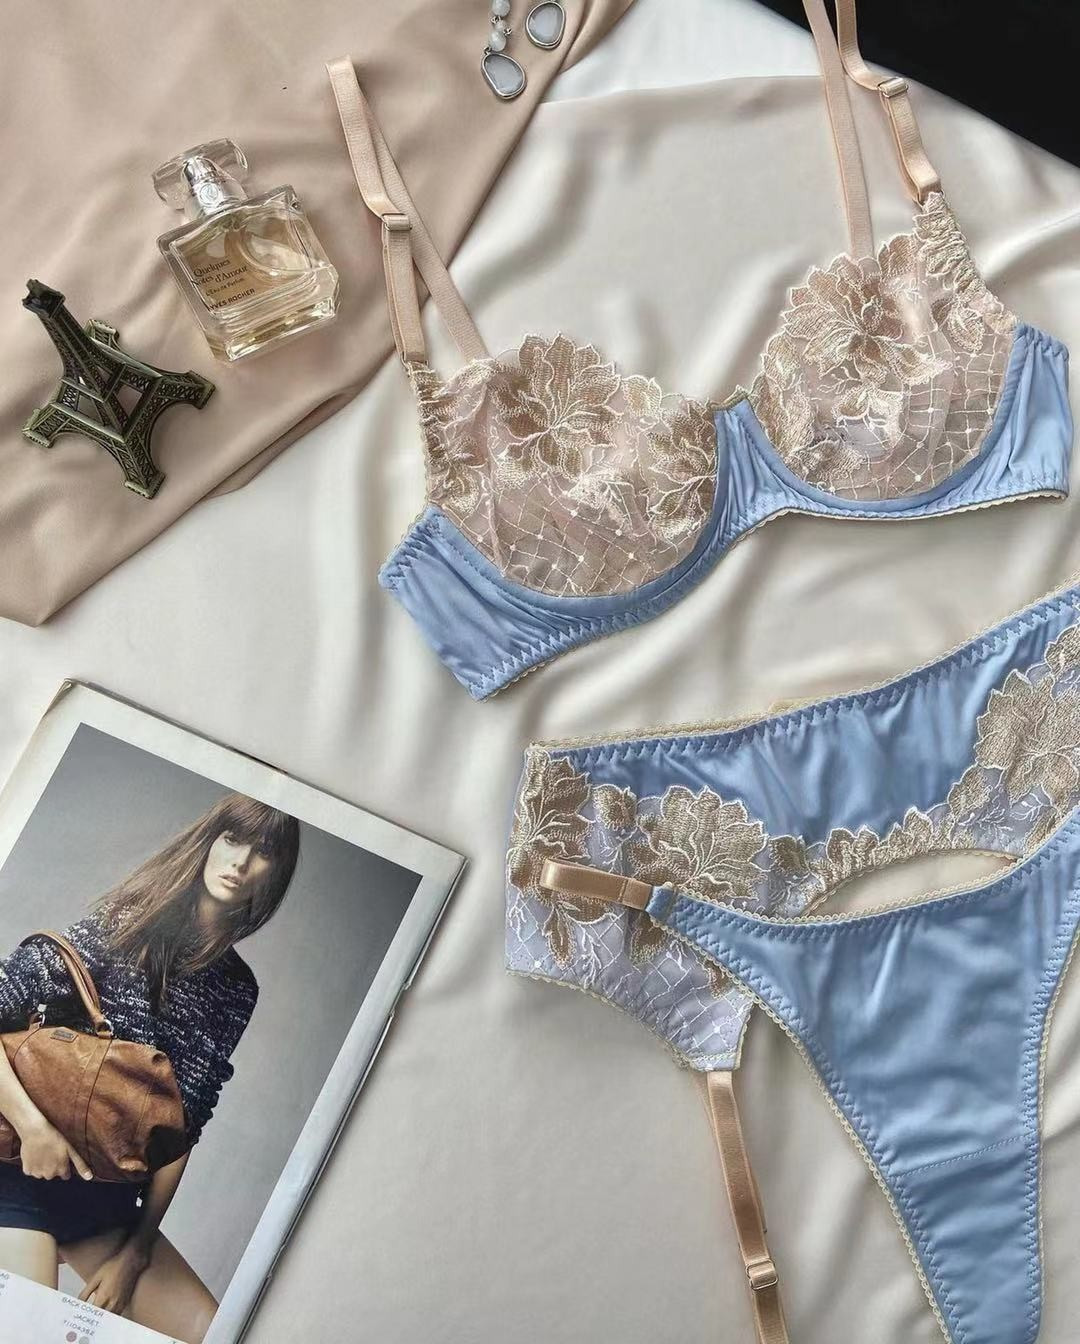 Vintage Glamour: Three-Piece Lace Lingerie in Blue and Champagne